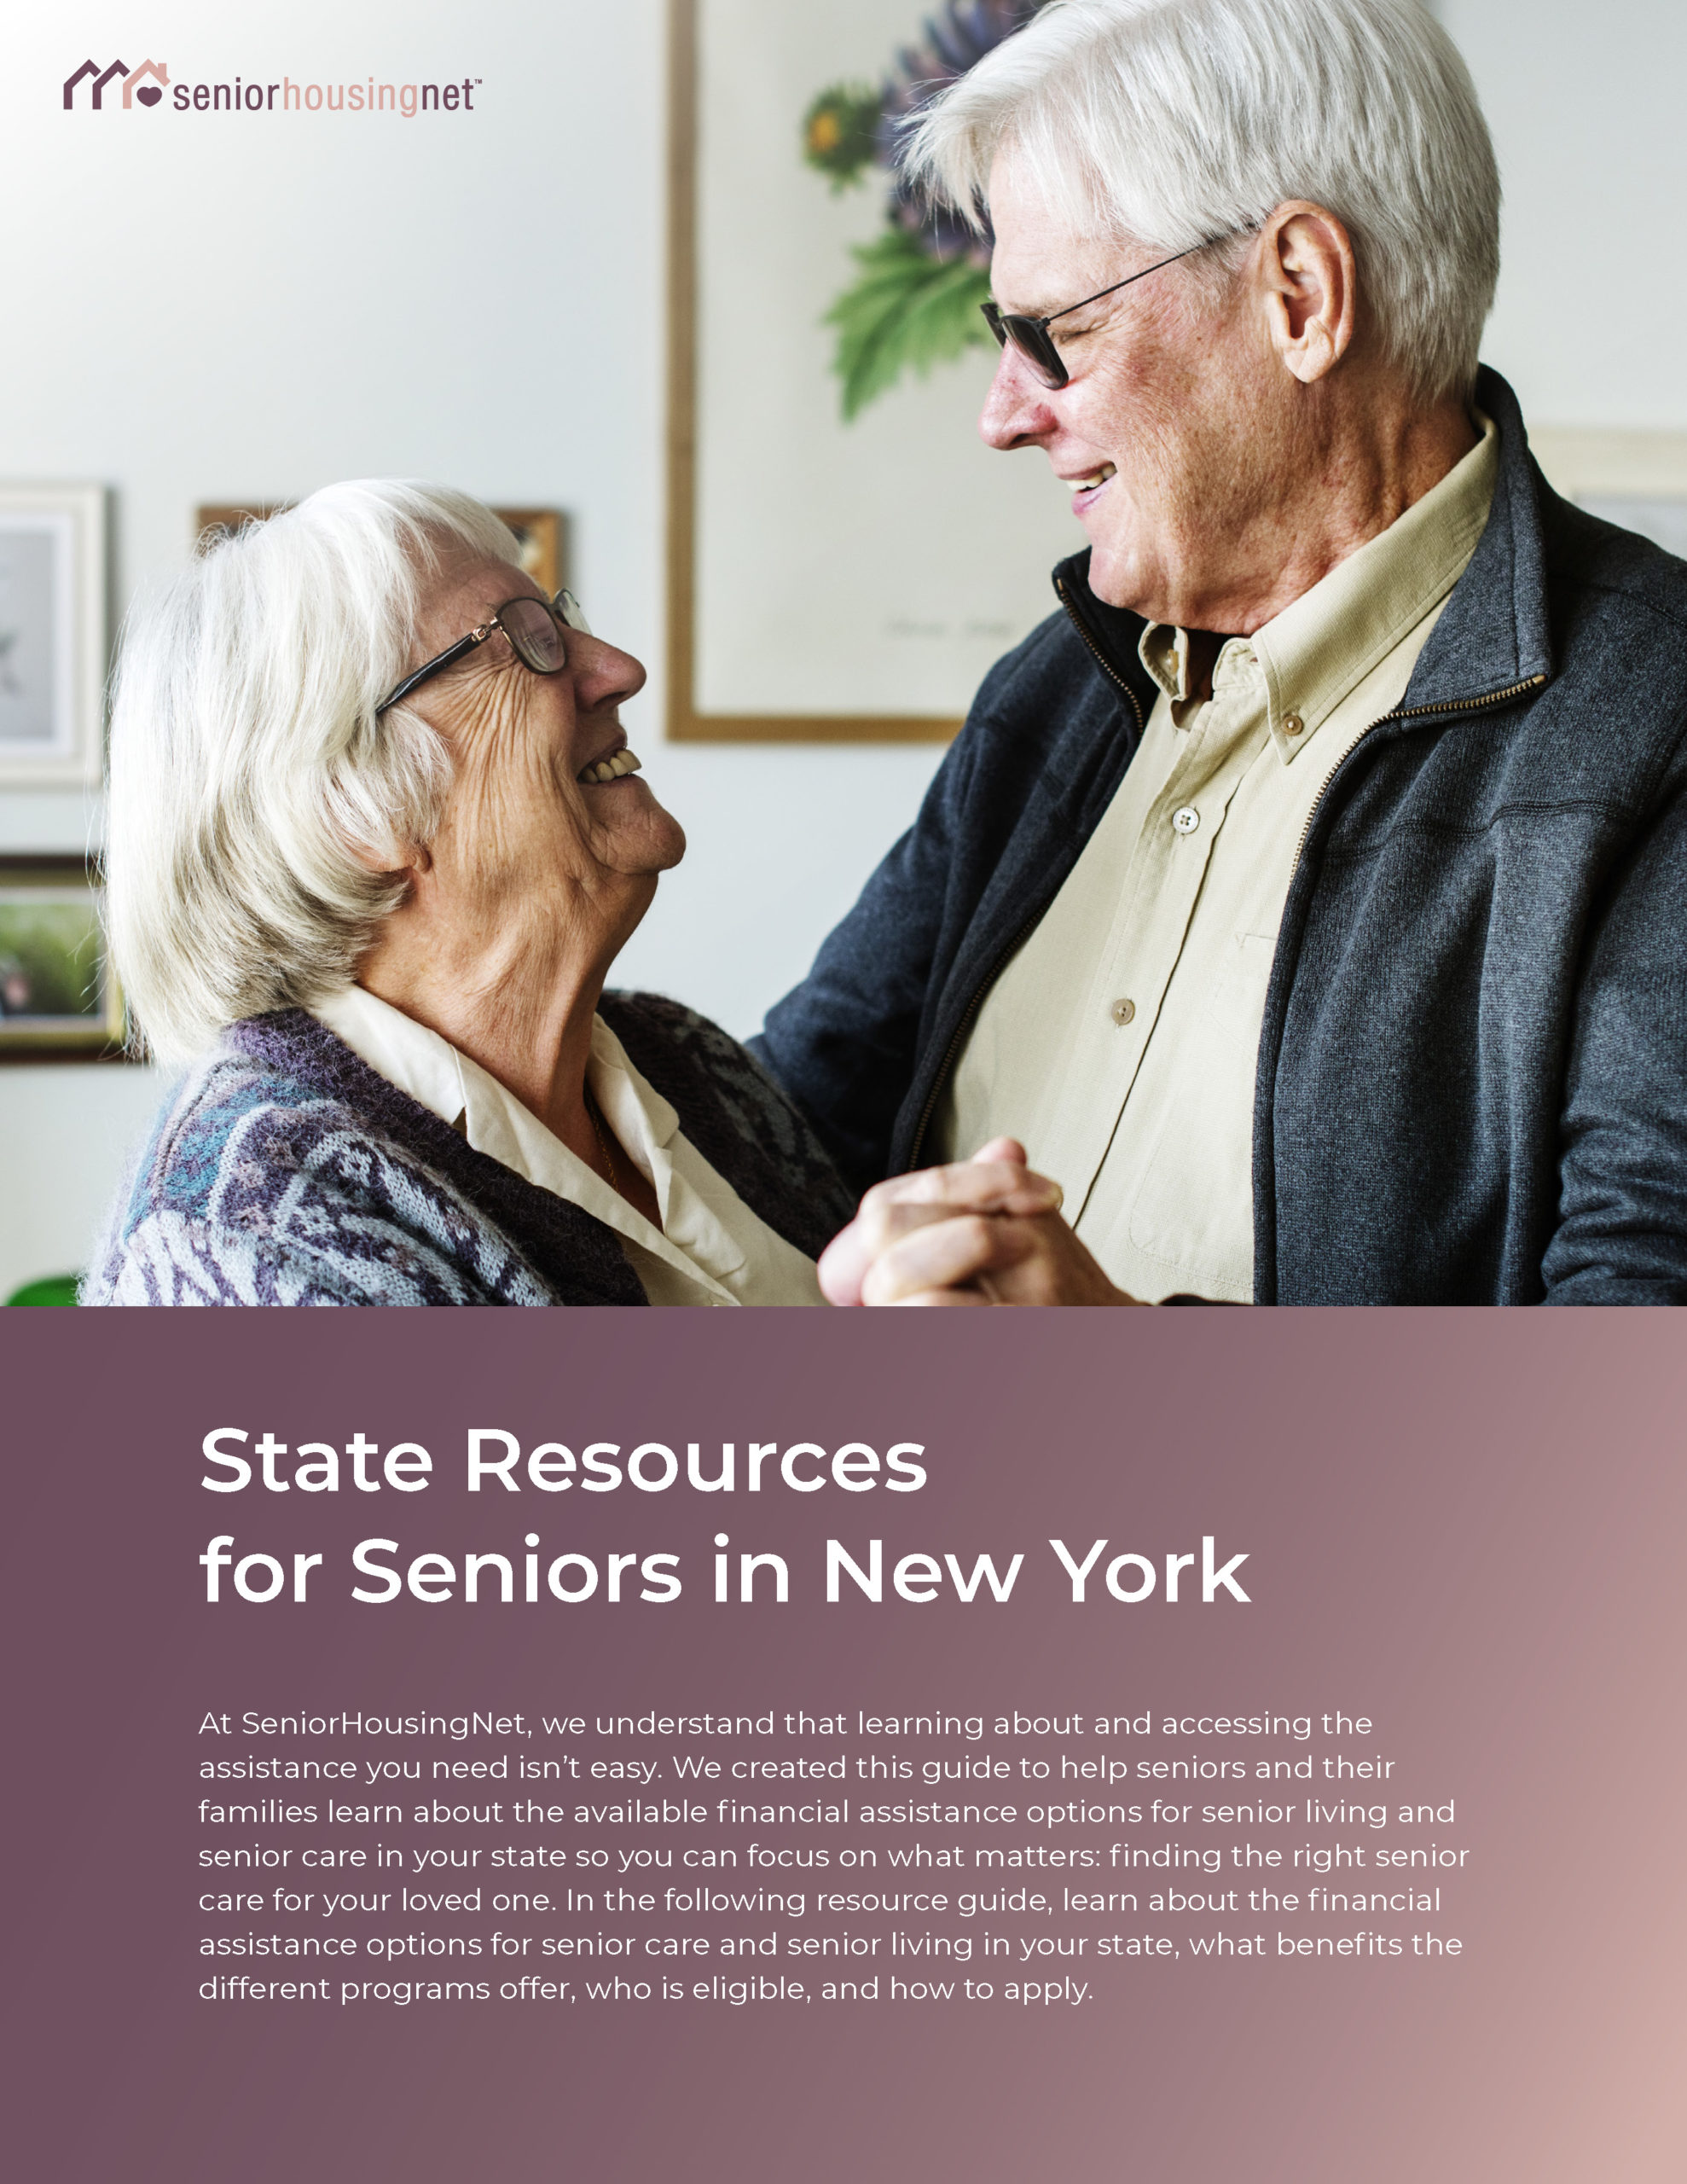 State Resources for Seniors in New York